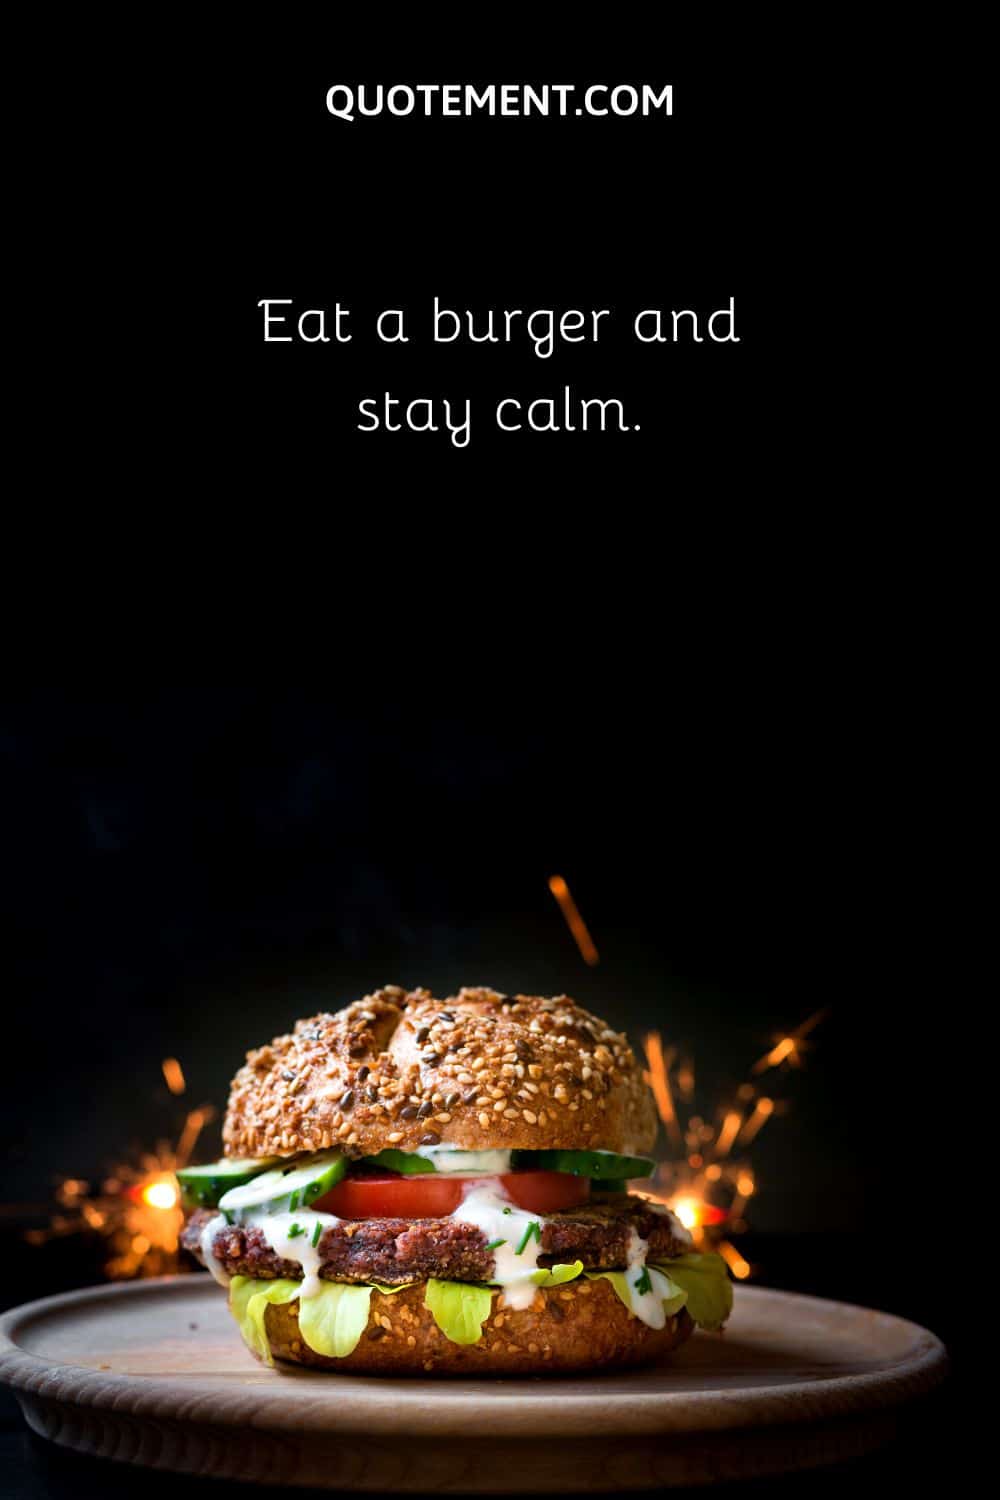 Eat a burger and stay calm.